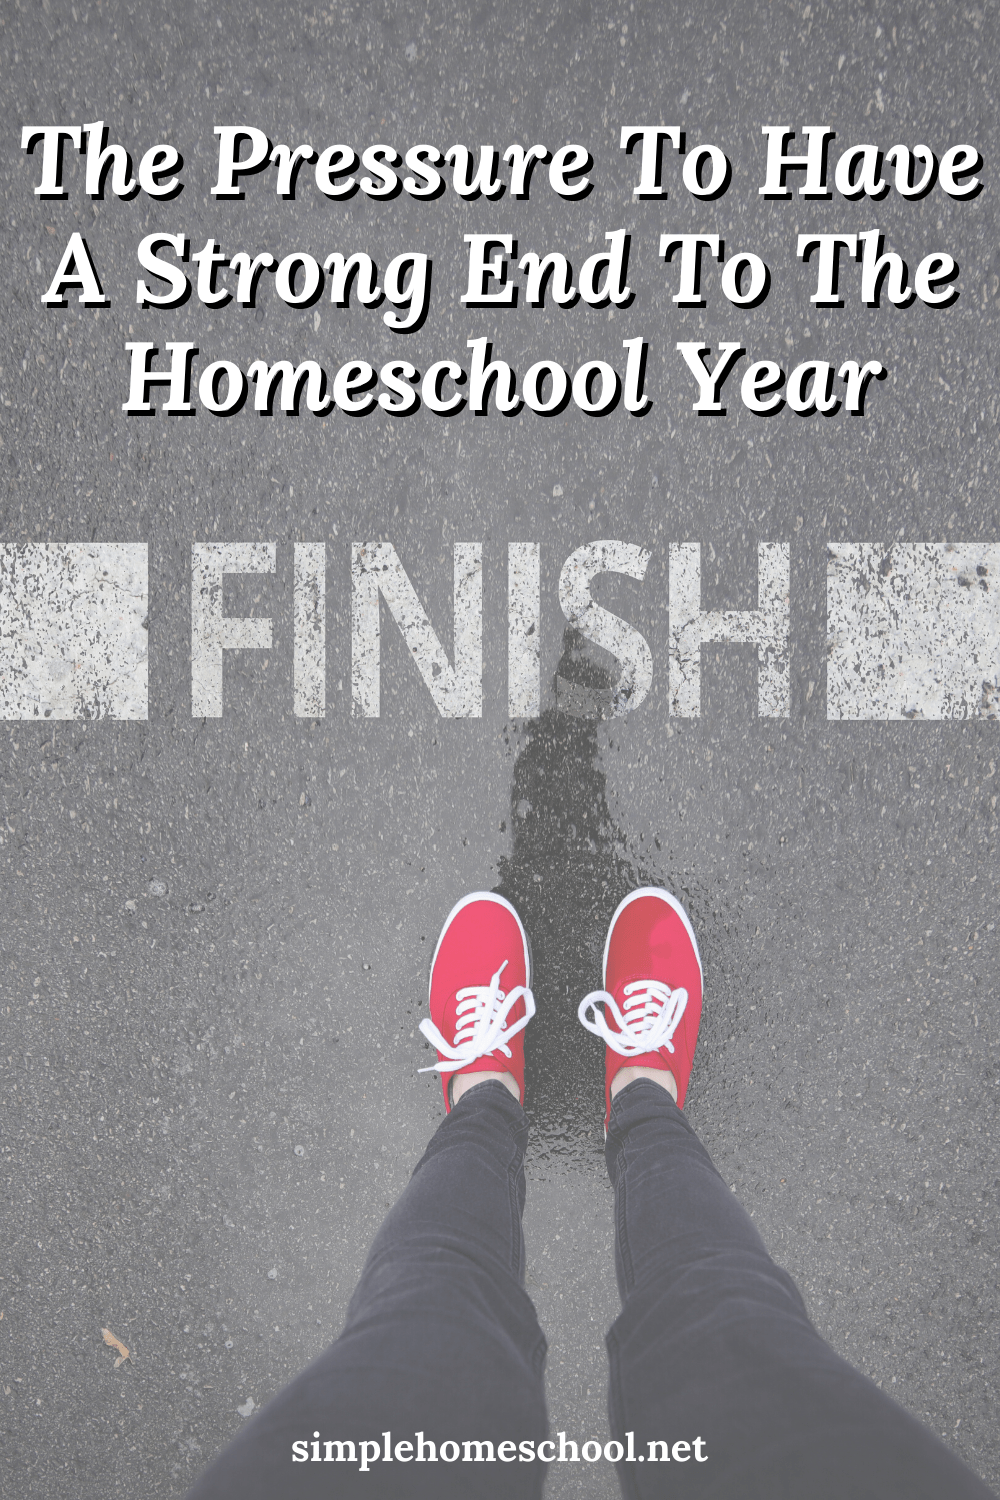 When To End The Homeschool Year